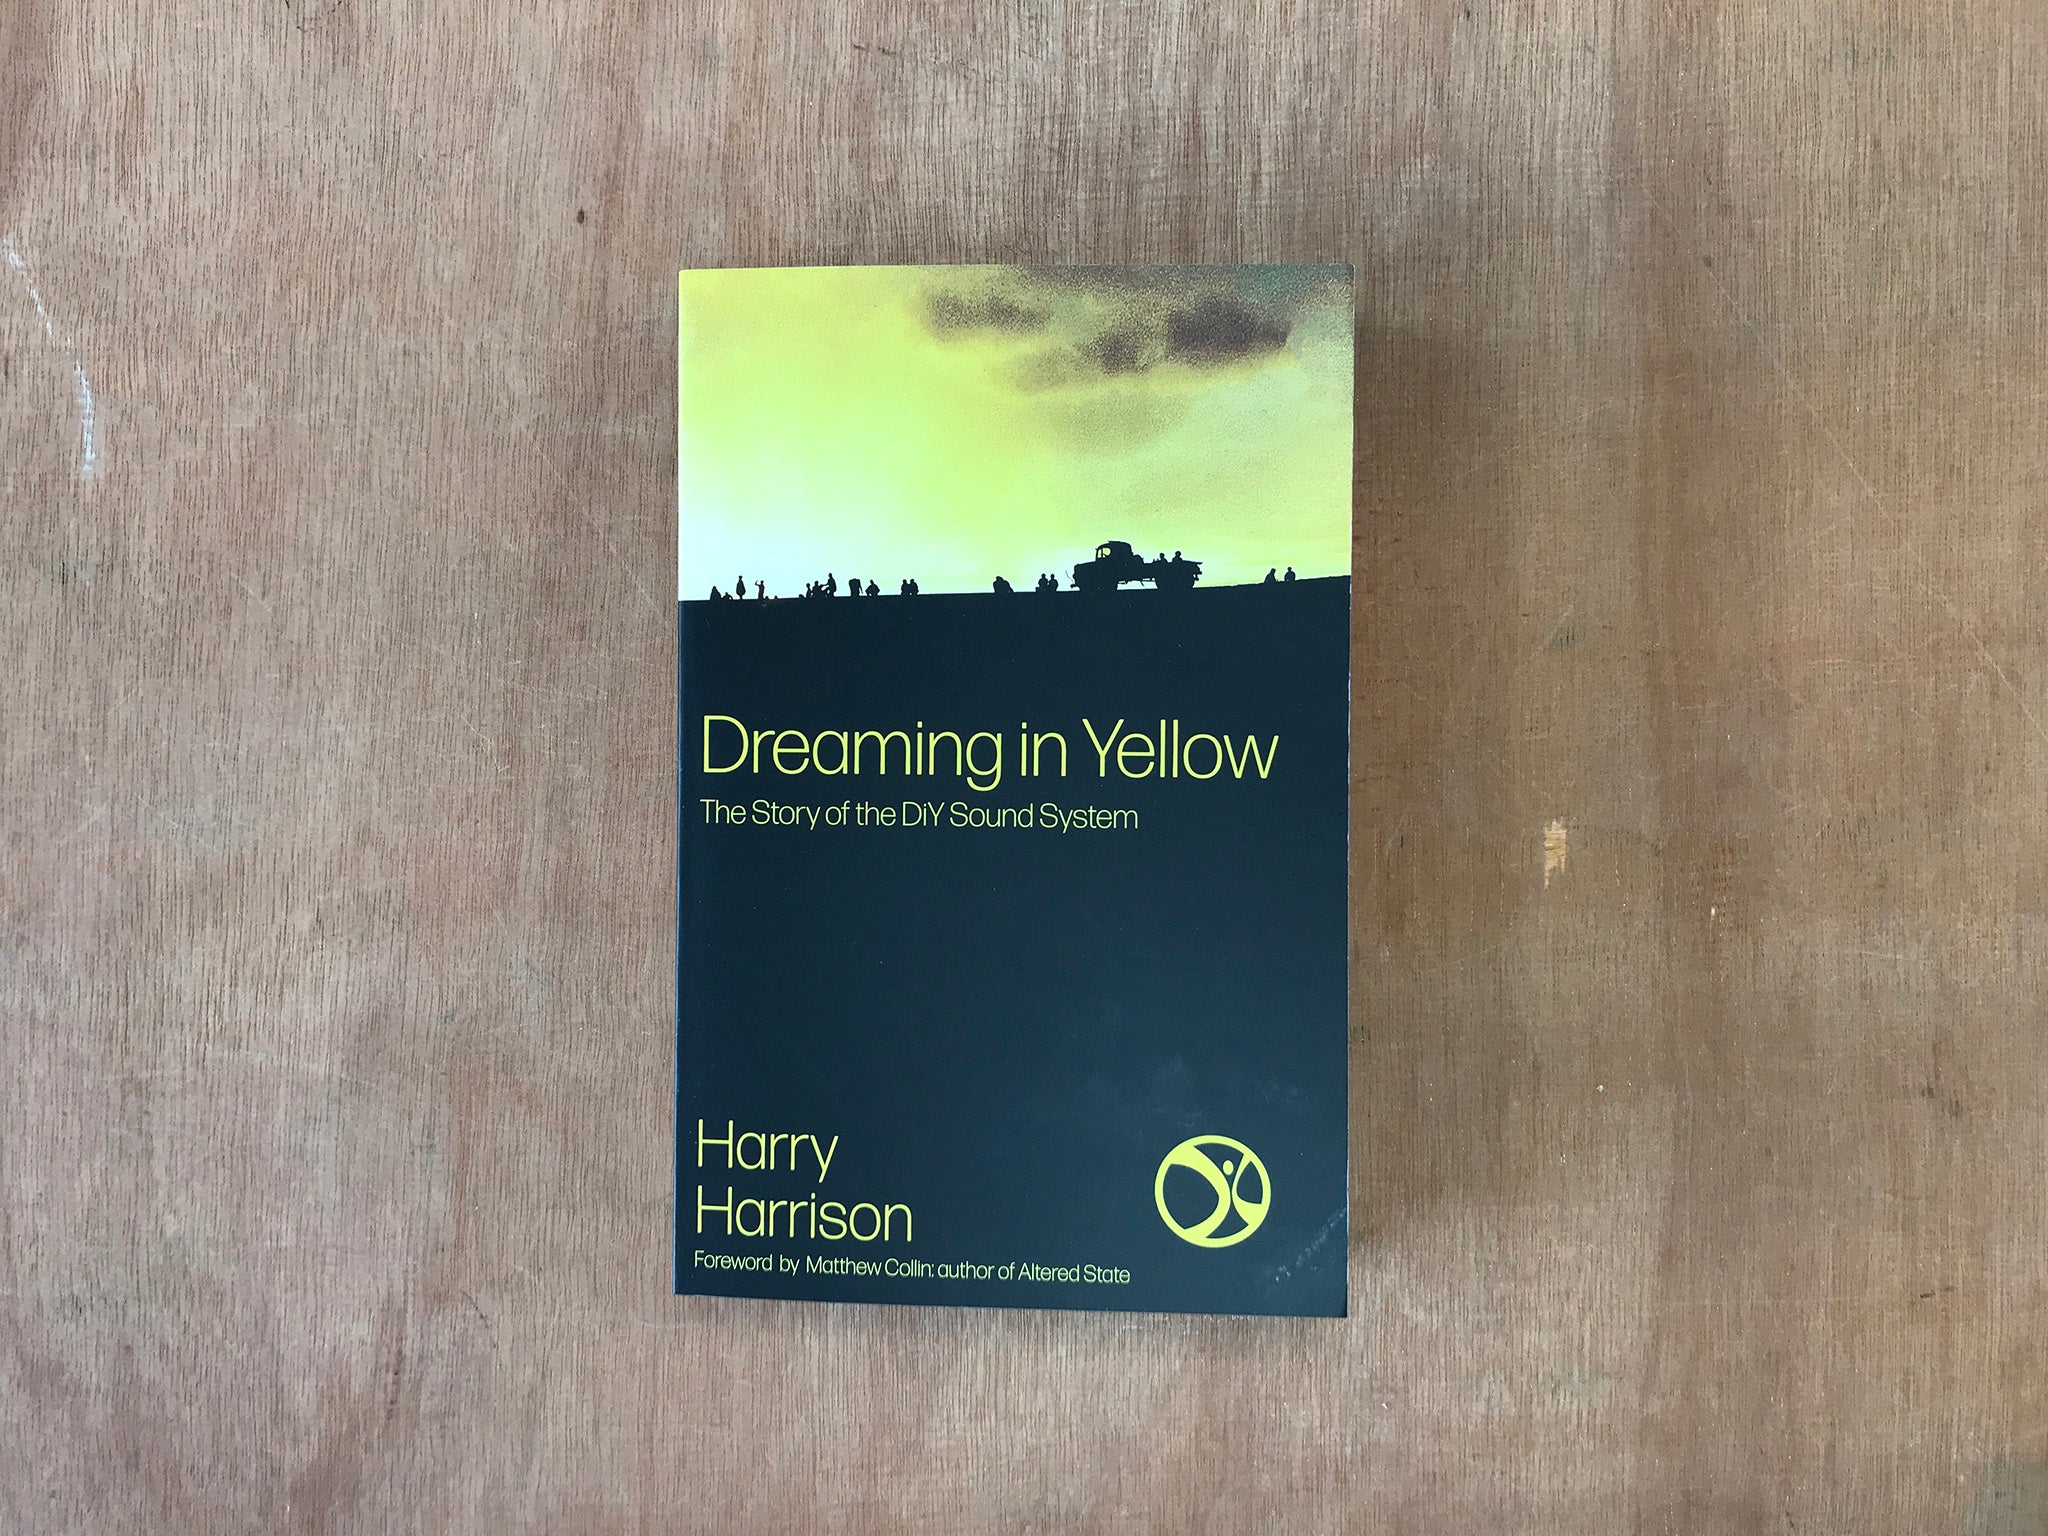 DREAMING IN YELLOW by Harry Harrison